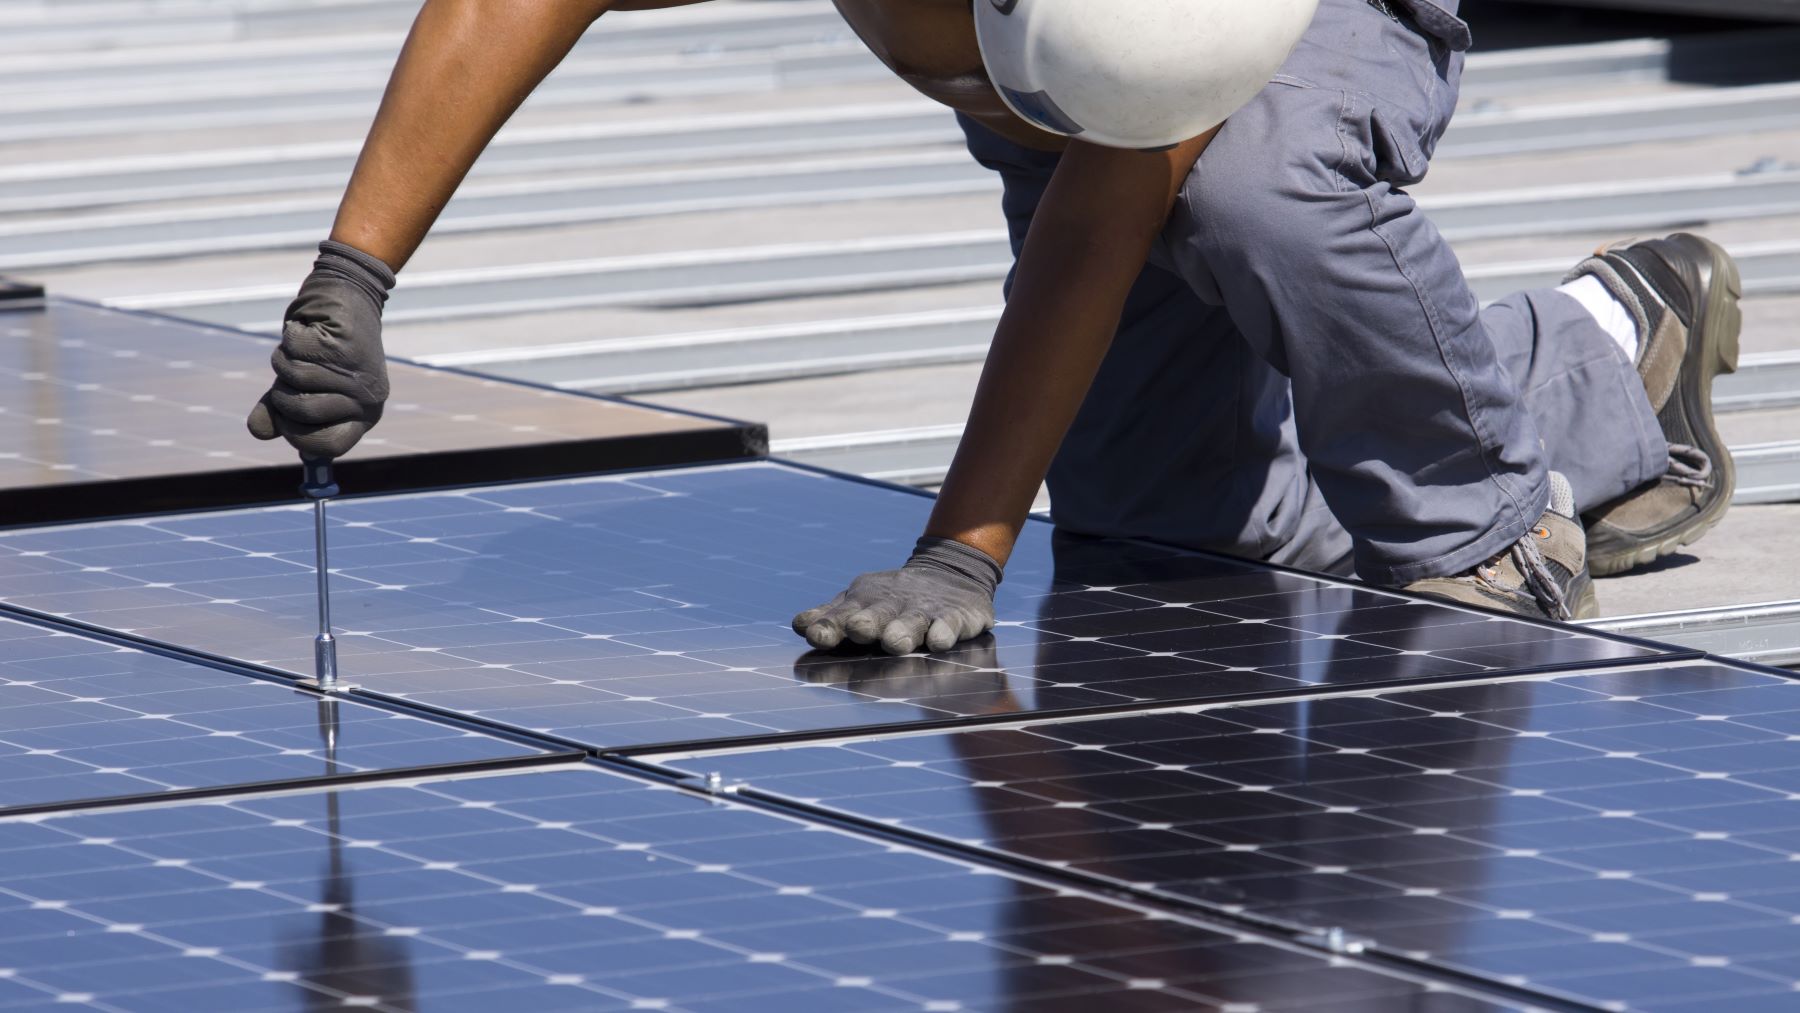 Person kneeling over a solar panel and screwing a part in.